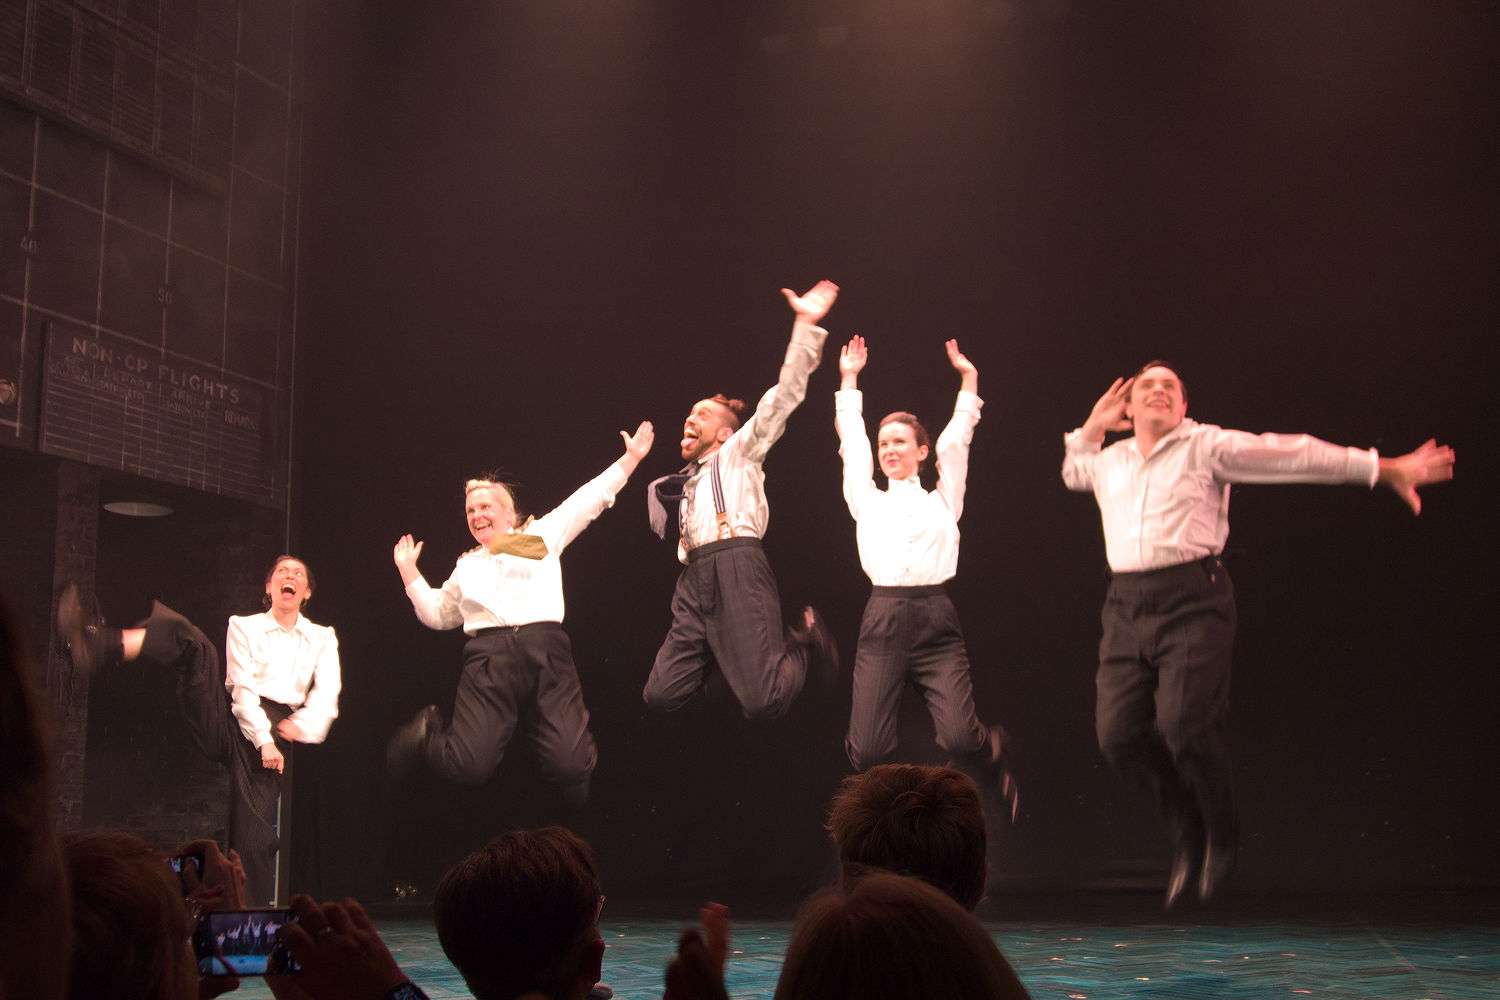 Picture shows three women, two men on stage before a black background. They are all wearing black trousers and white shirts. They are jumping up to various degrees